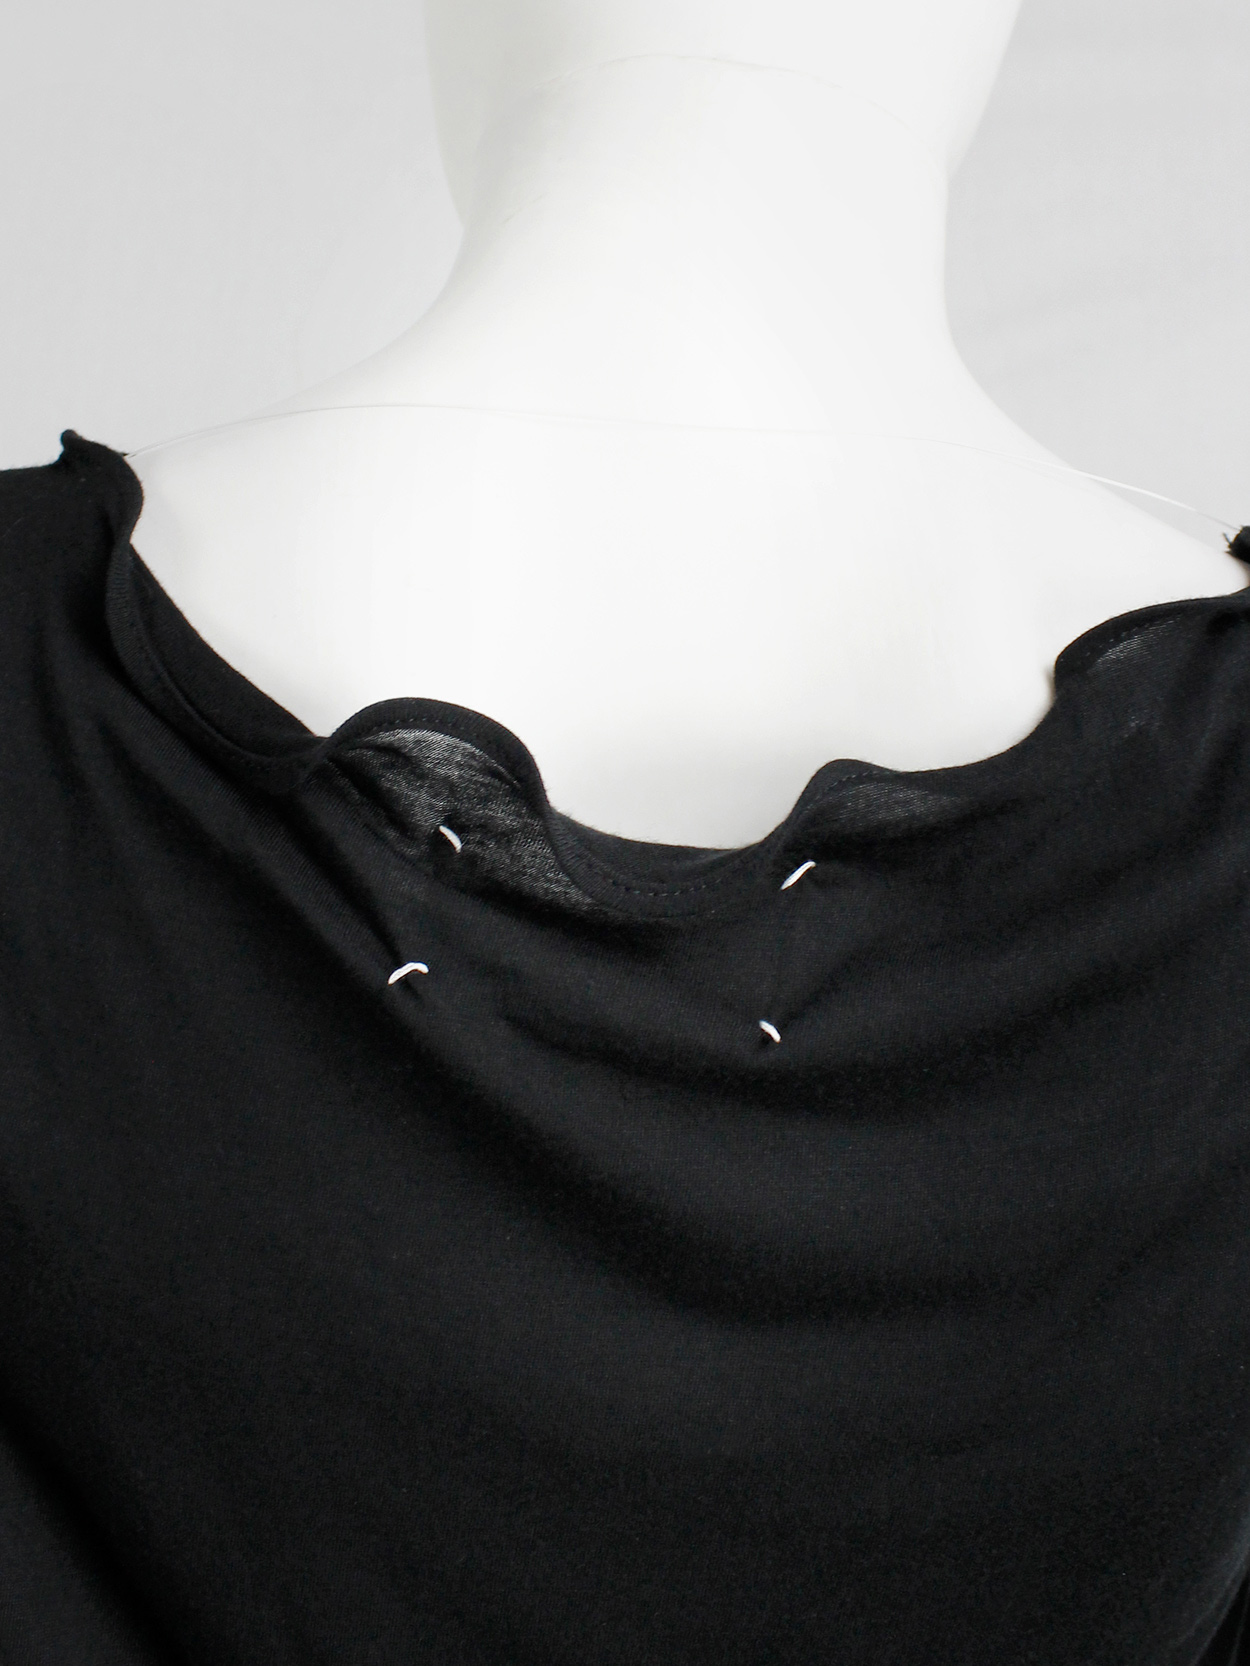 Maison Martin Margiela black t-shirt with stretched out neckline spring 2007 (2)